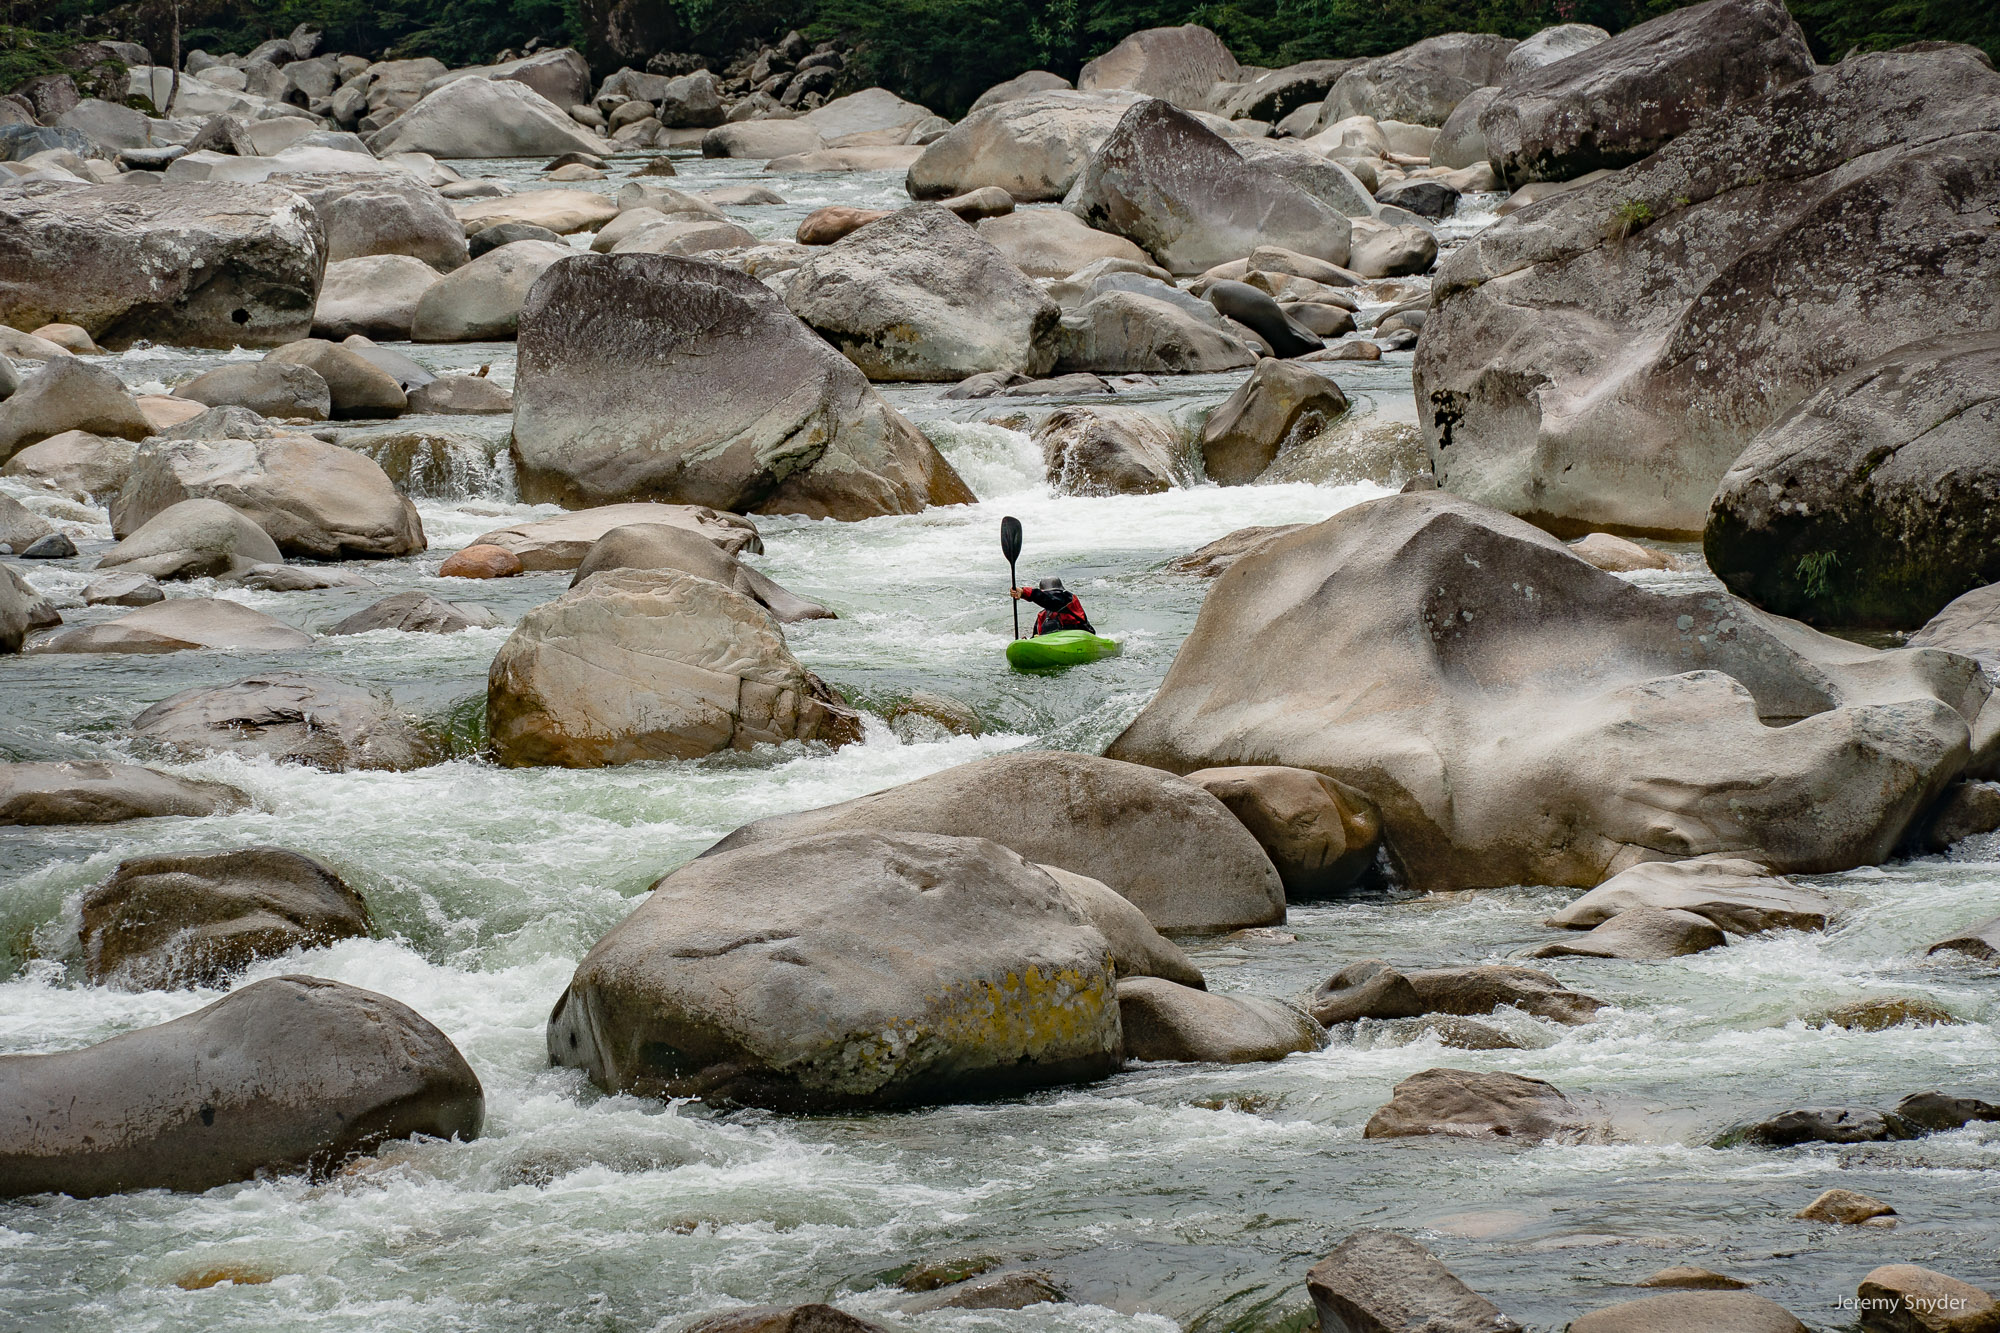 A kayaker paddles the Piatua river in Ecuador, among boulders brought down from the Andes